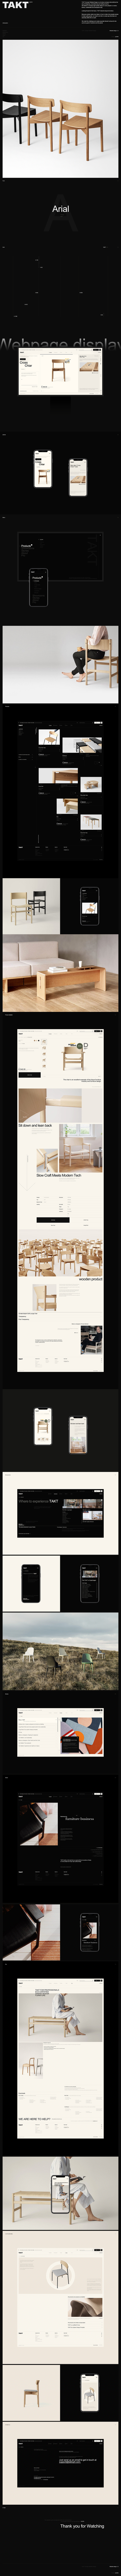 casual chair concept flat furniture succinct table UI user experience Website Design